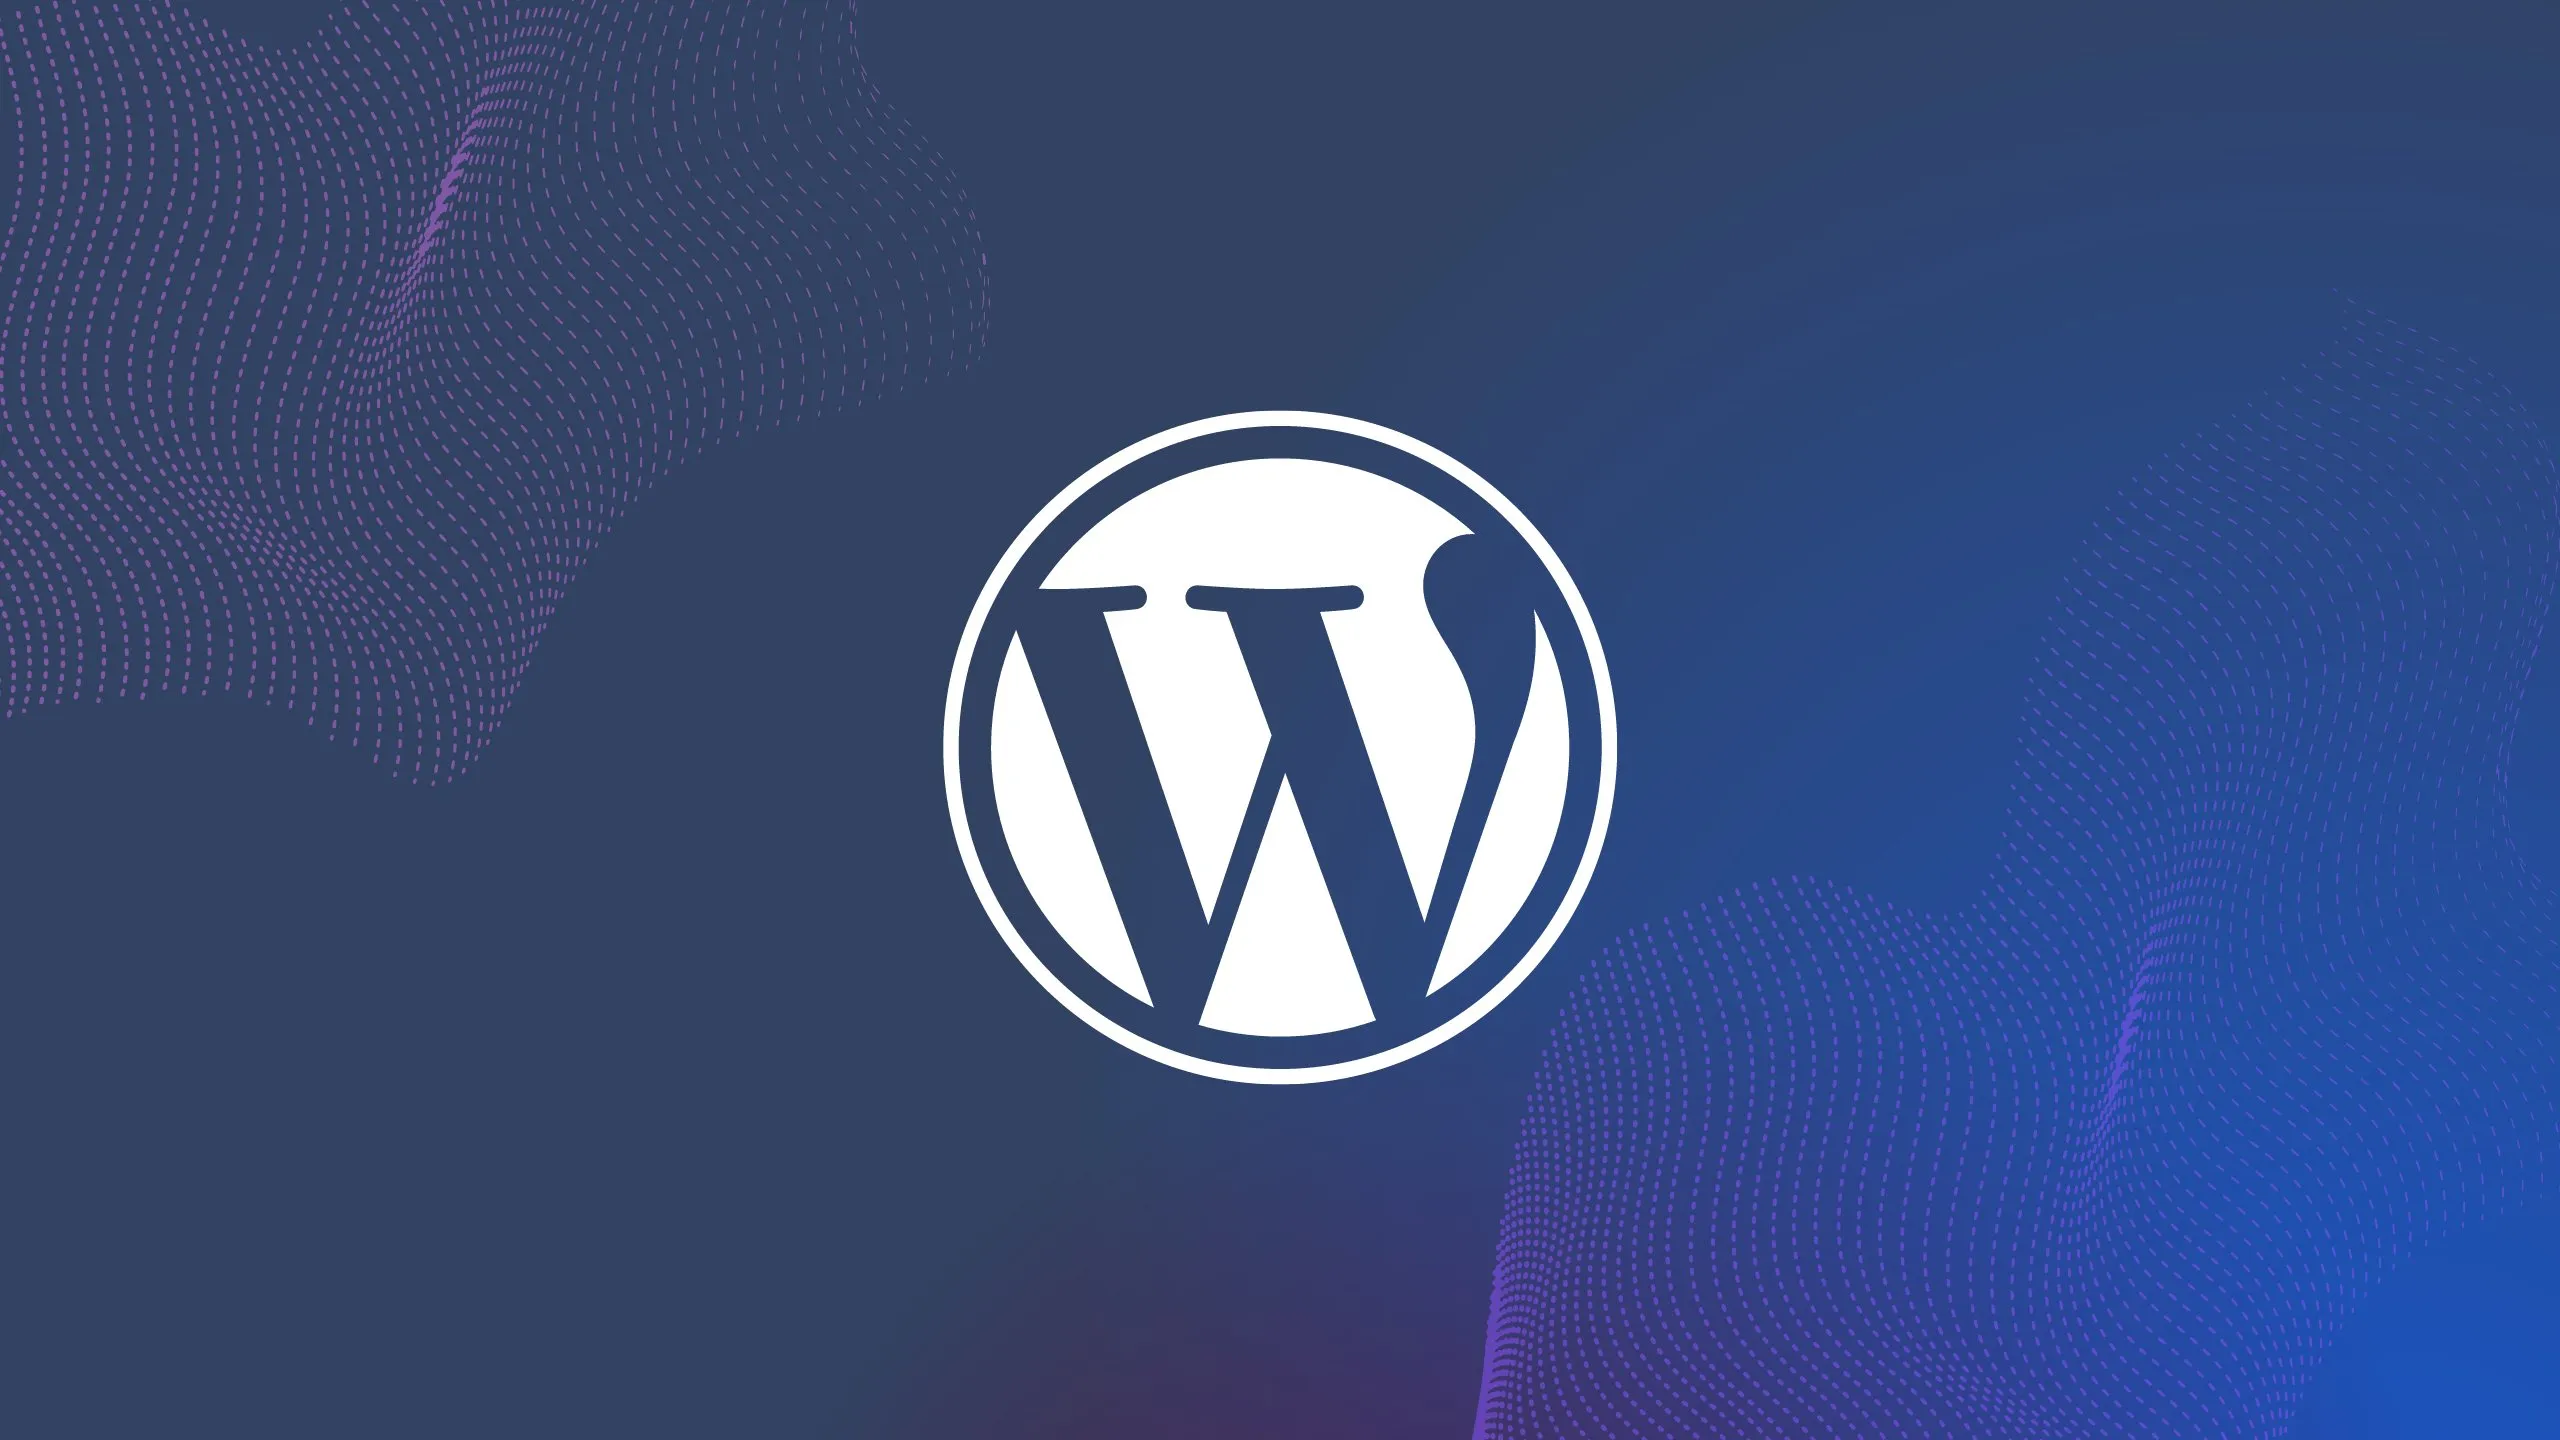 How To Create a Wordpress Website - Drag And Drop